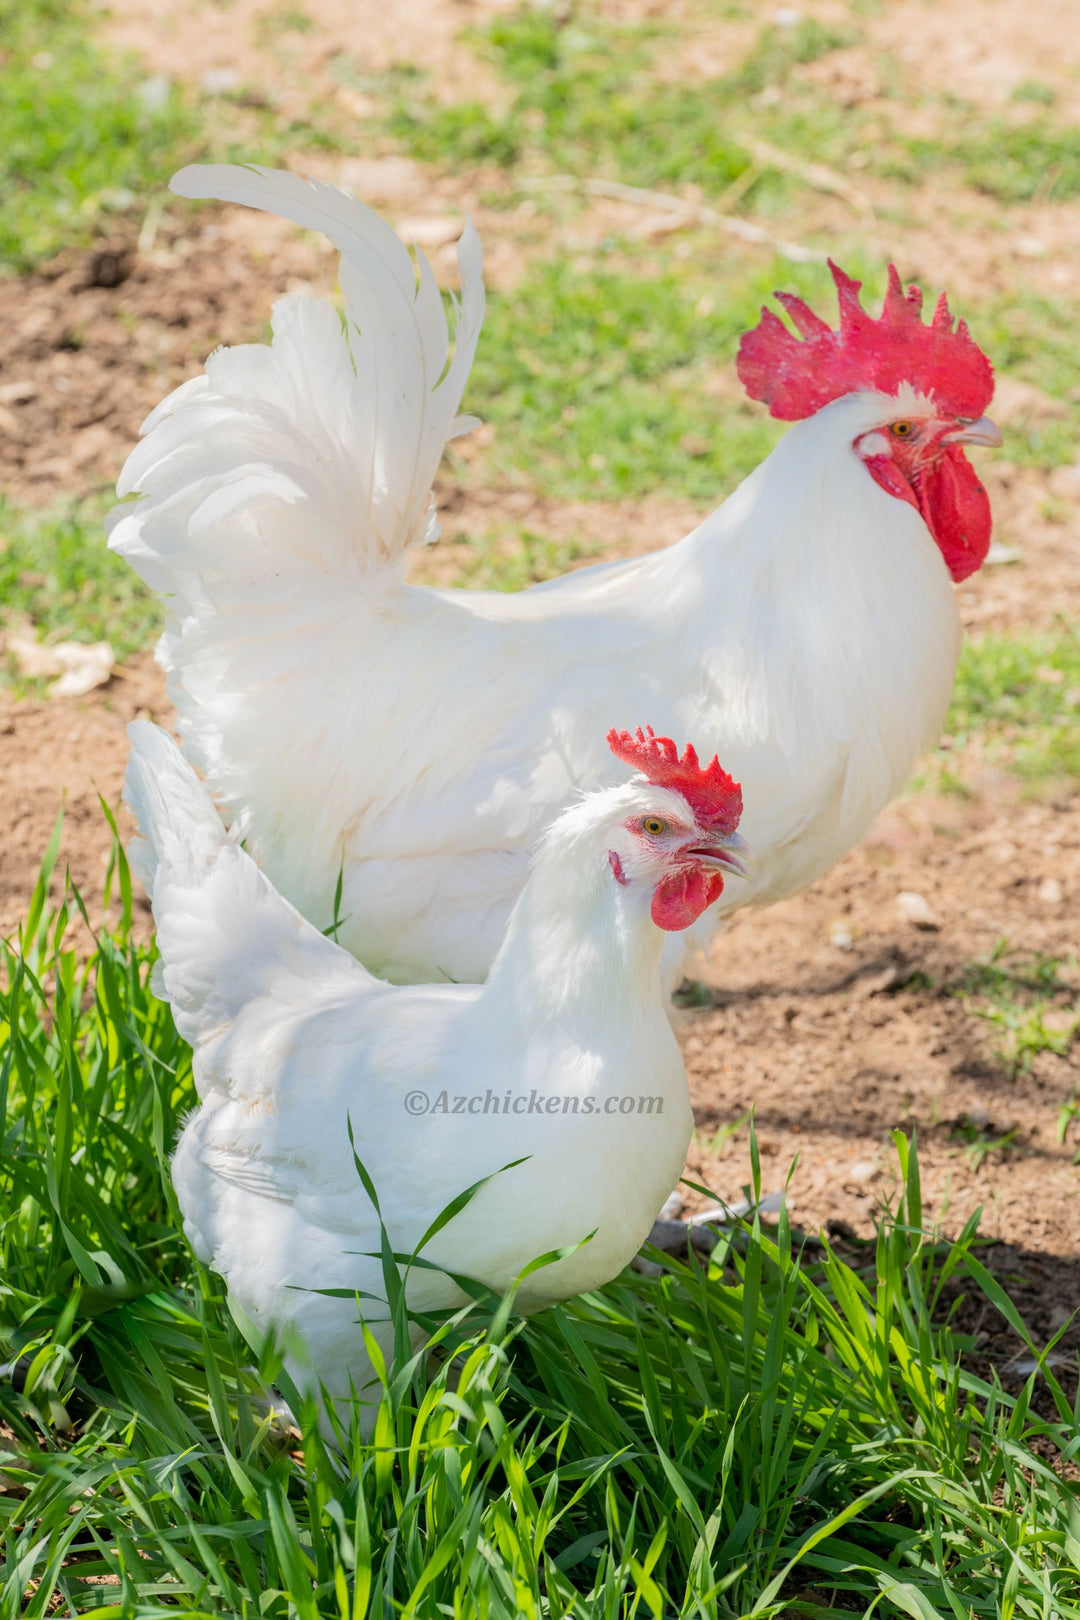 White Bresse Rooster foraging in grass